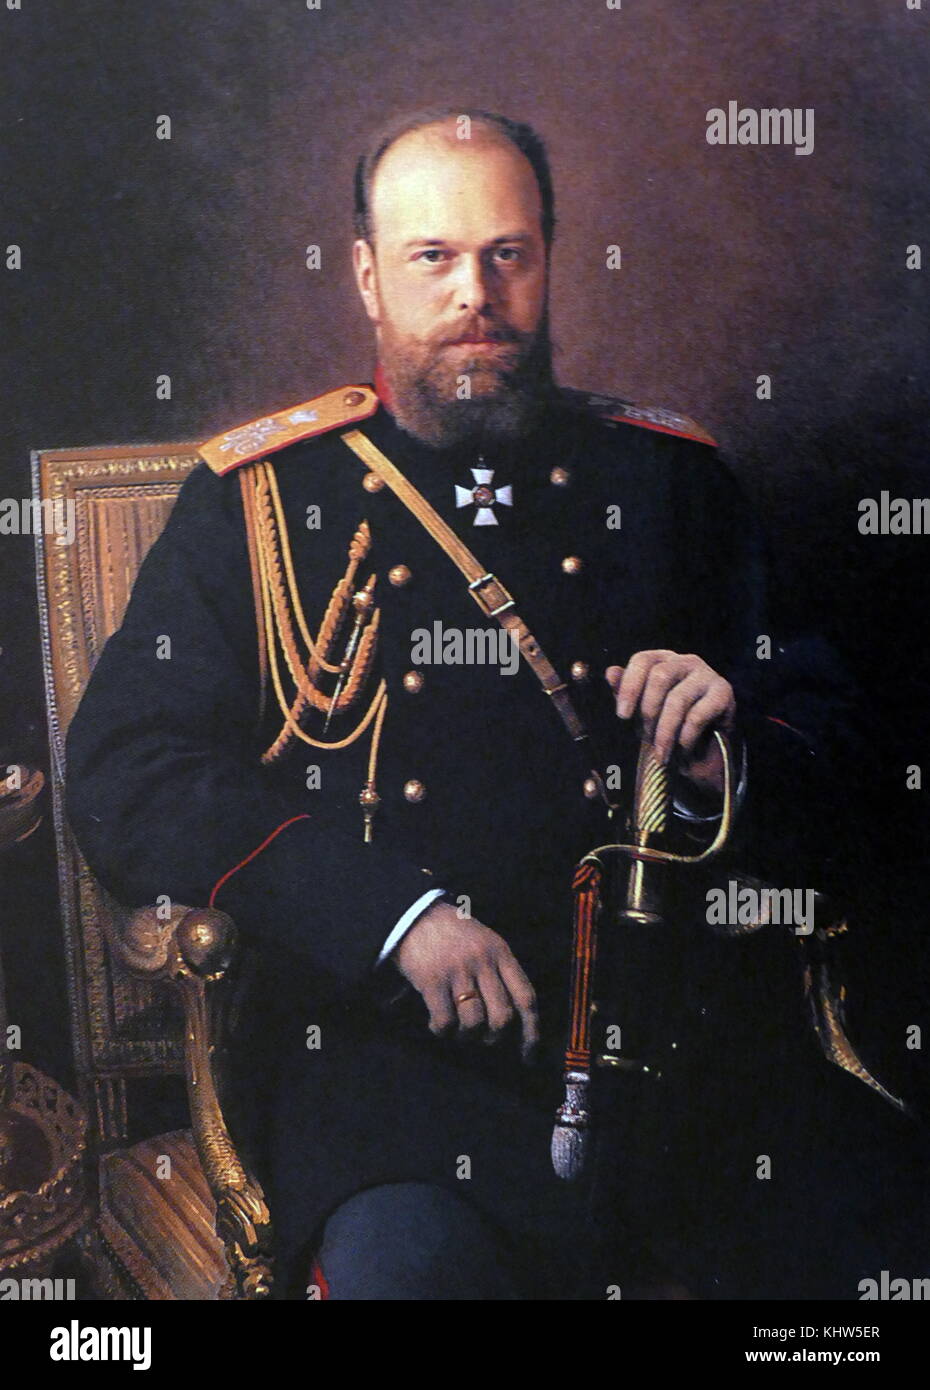 Portrait of Alexander III of Russia (1845-1894) Emperor of Russia, King of Poland, and Grand Duke of Finland. Dated 19th Century Stock Photo